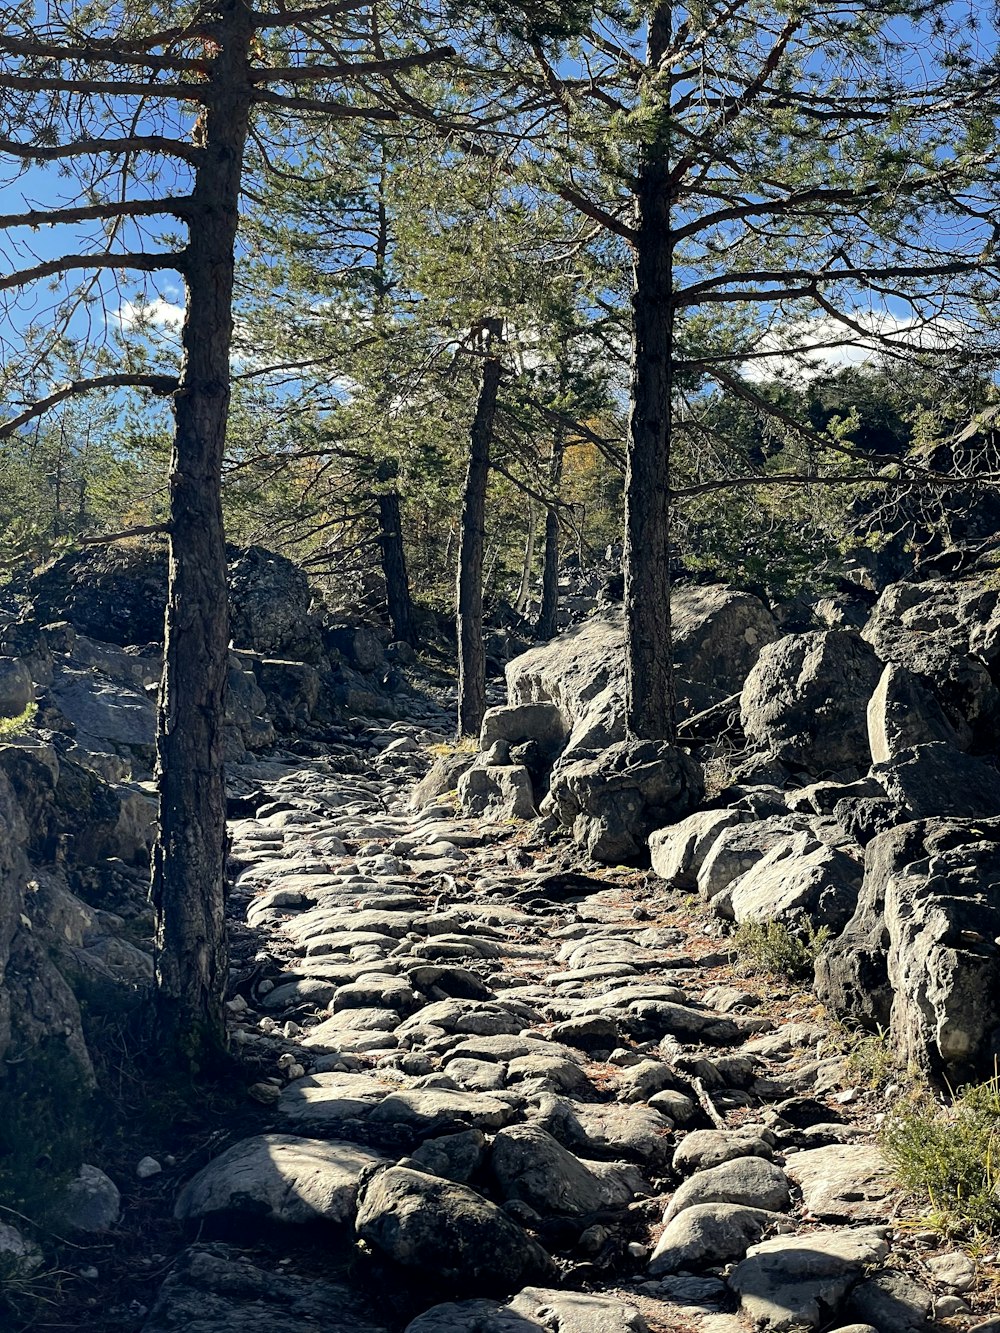 a rocky path with trees on both sides